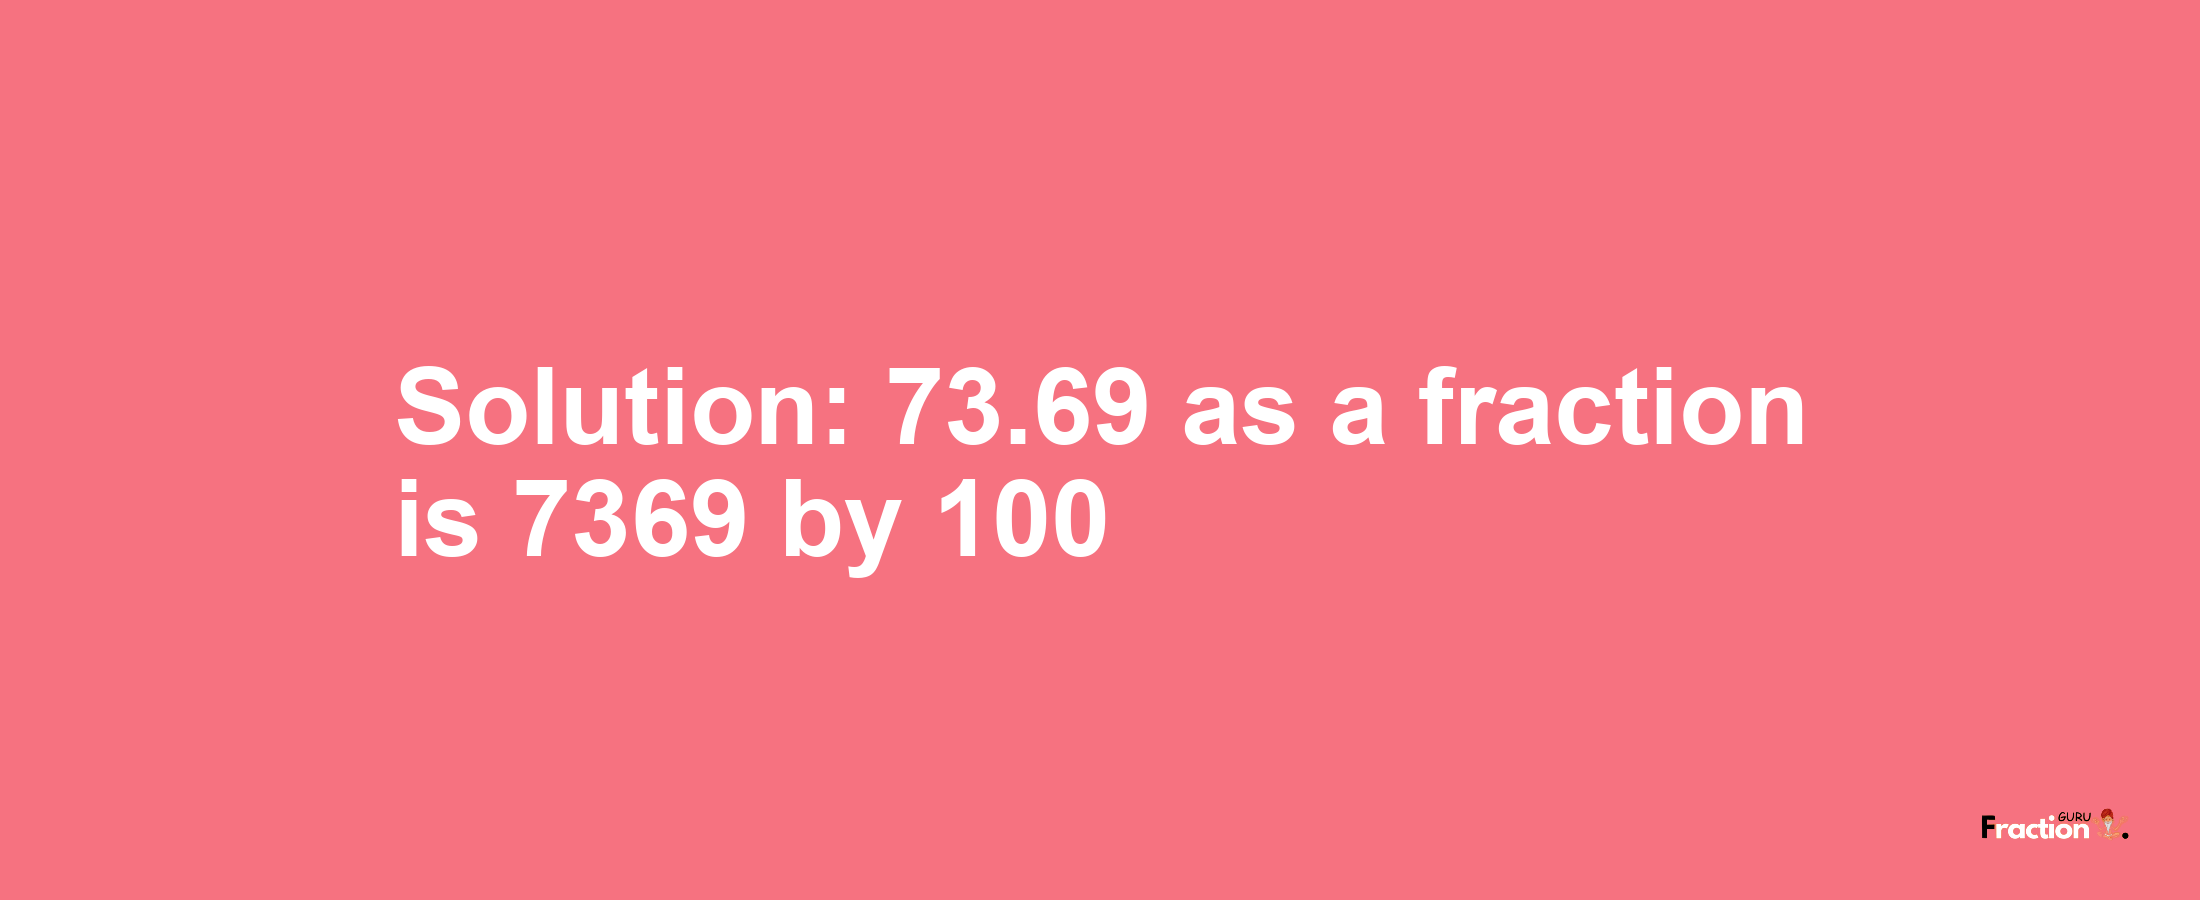 Solution:73.69 as a fraction is 7369/100